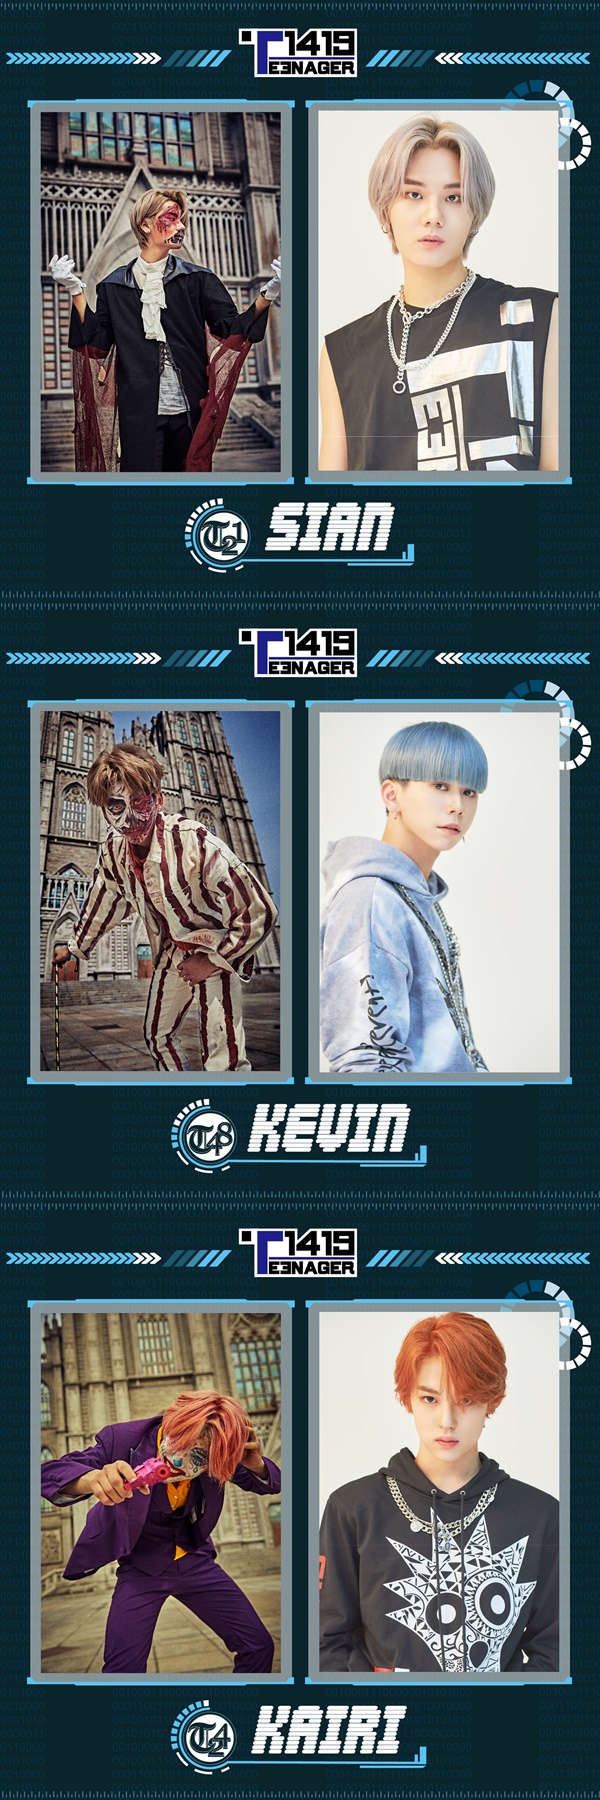 MLD Entertainment has unveiled its newly launched new Boy Group T1419 members Cyan (SIAN), Kevin the Mini (KEVIN), and Kaili City (KAIRI).On the 4th, noon T1419 posted a profile image of the last runners Cyan, Kevin the Mini and Kaili City through the official SNS channel.The last members to be released are Cyan, Kevin the Minion and Kaili City.Cyan, Kevin the Mini, and Kaili City are attracted to the team with their unique tone and singing ability.After the final veiled member, T1419 completed a total of nine complete releases, including Gunwoo, Kio, On, Leo, Noah, Zero, Cyan, Kevin the Minion and Kaili City.They are aiming for the global market with their ability to combine vocals, rap, dance, visuals and production skills.In particular, fans around the world are reacting to the T1419s visuals of the year, which is contrary to the unconventional costume that was shown in the previously released free debut song Dracula.T1419s free debut song Dracula is an extraordinary costume, intense performance, and an addictive melody based on hip-hop, and has been popular with about 7 million views at the same time.T1419 is a super-sized new boy group that MLD, global IT companies NHN and Sony Music are working together to showcase. It is a limited-purpose project designed to make simultaneous debuts not only in Korea but also in the US and Japan.It has been intensively trained in a systematic system, and is expected to be composed of top-notch members with various talents such as vocals, rap, performance, production, and language conversation ability as well as visuals.T1419 will launch various promotional contents starting with the release of the full member and will accelerate preparation for debut.